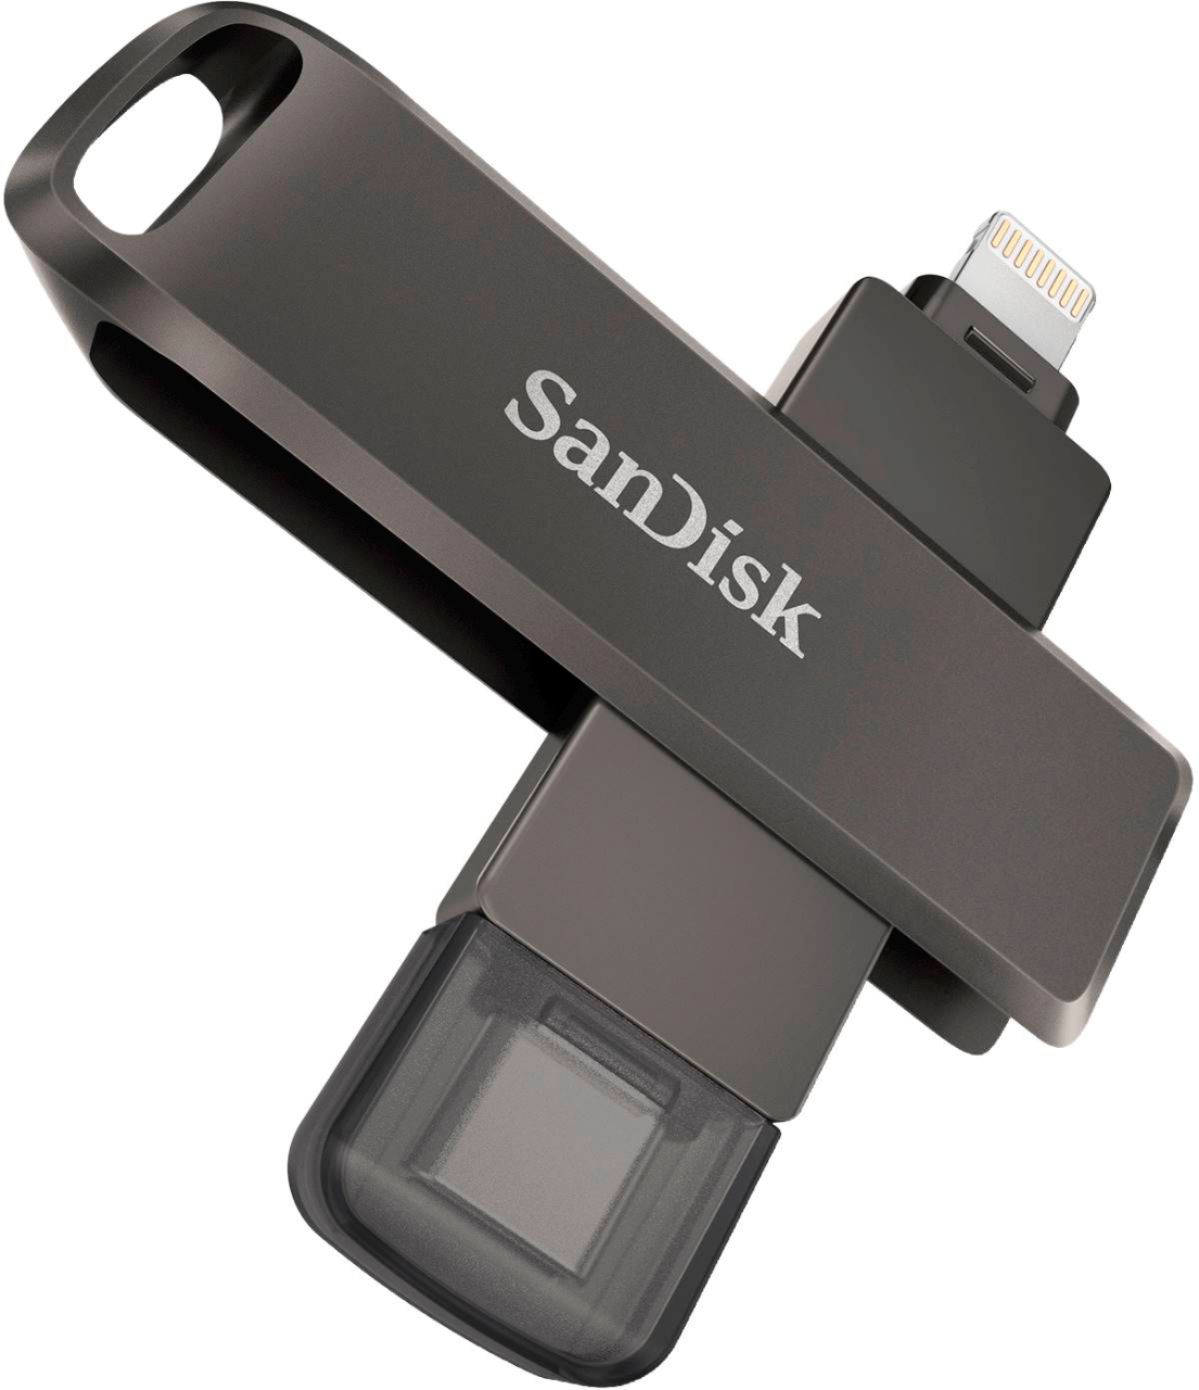 SanDisk iXpand 128GB Flash Drive for iPhone iPad and Computers